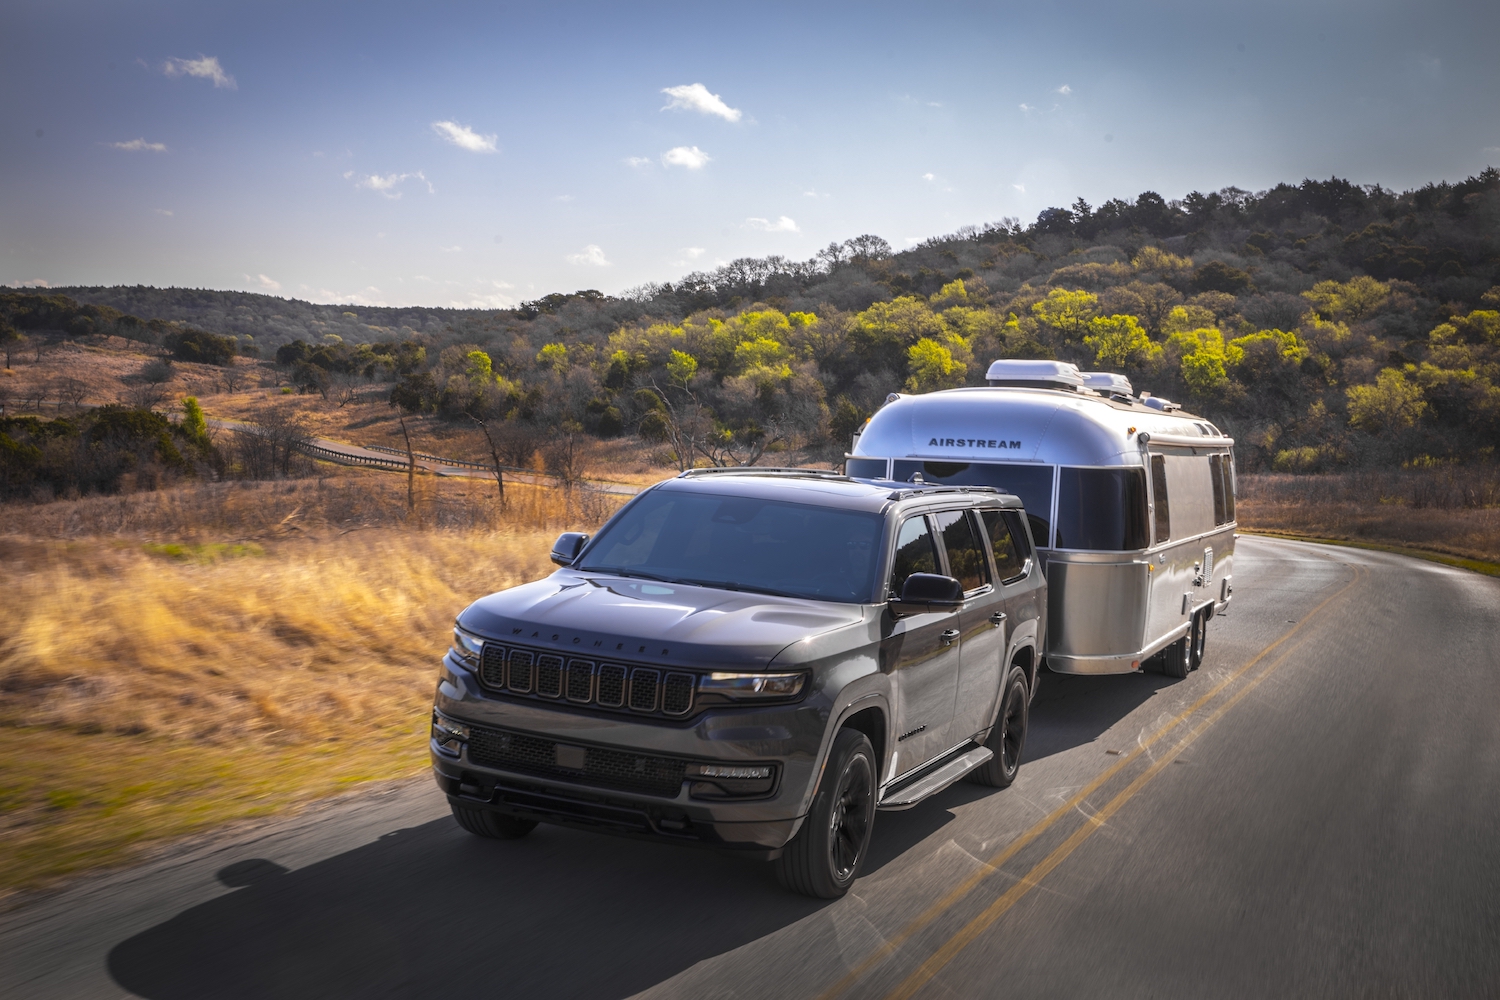 2023 Jeep Wagoneer L towing a camper